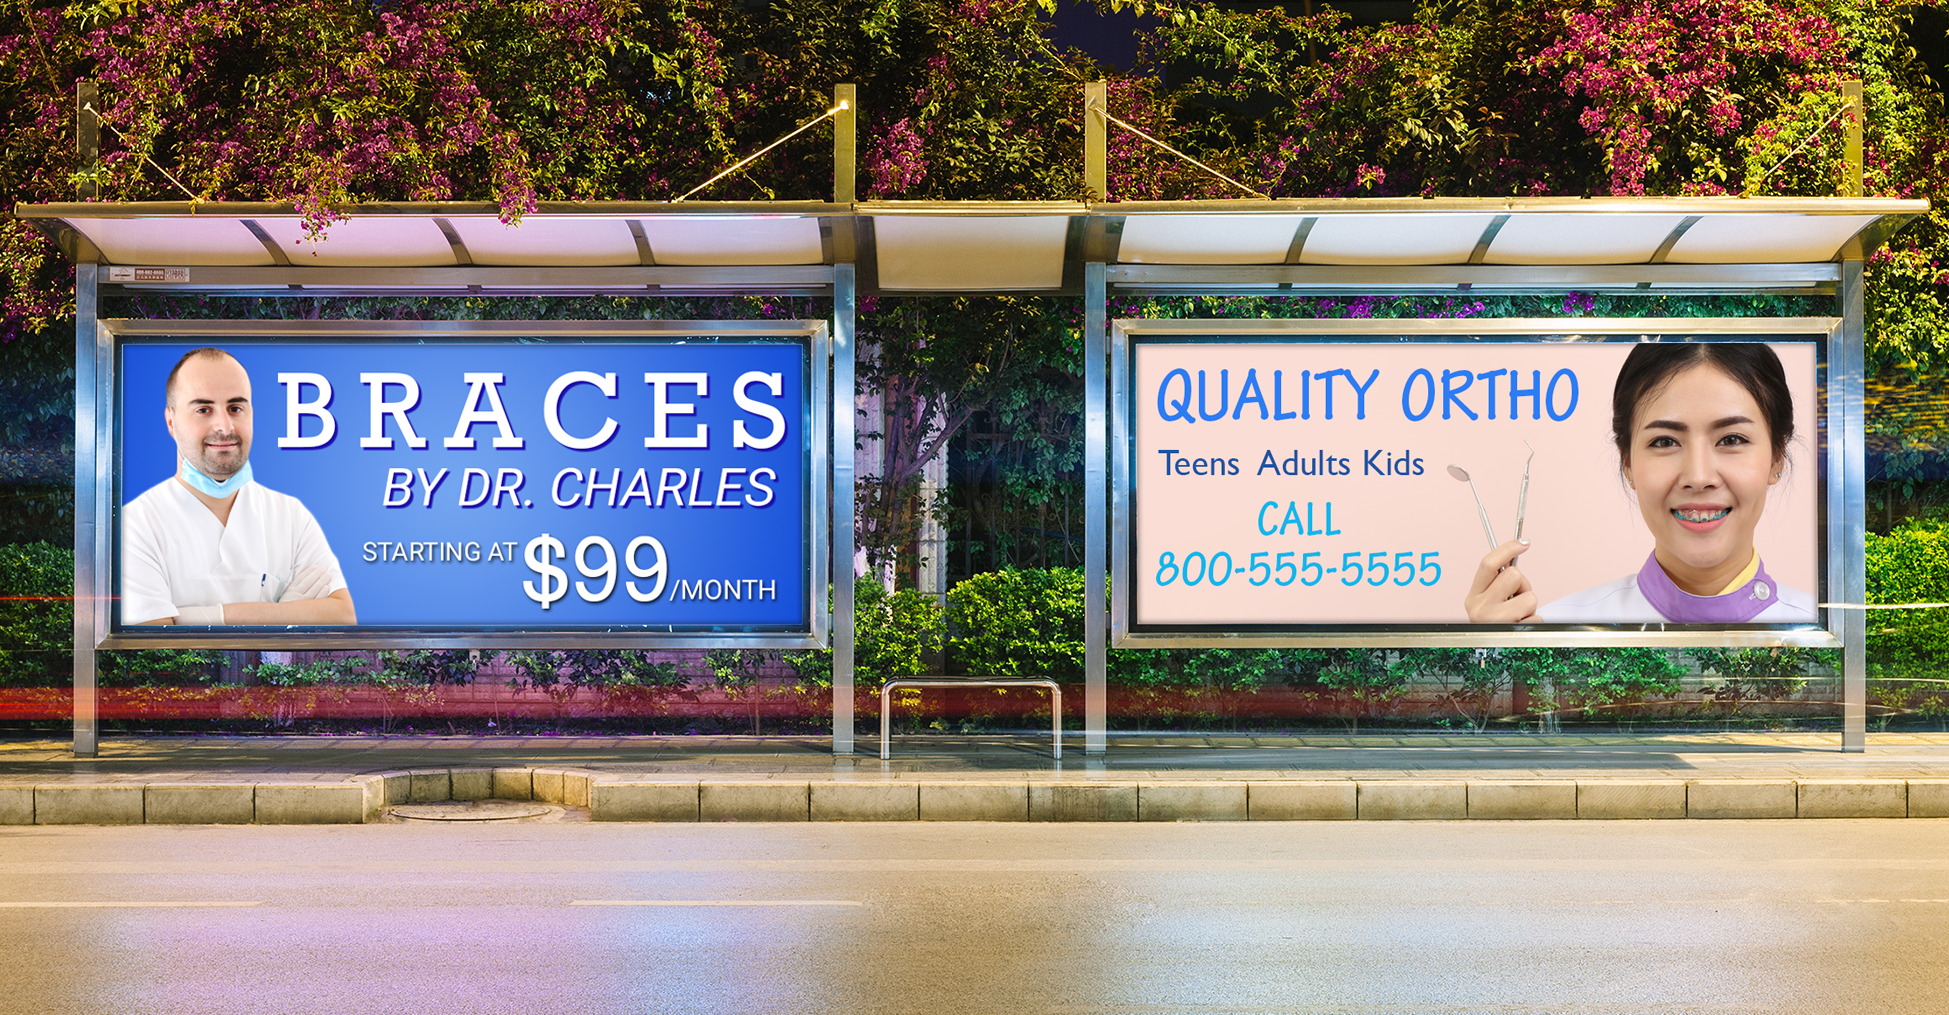 orthodontic billboard advertisement for braces and quality ortho